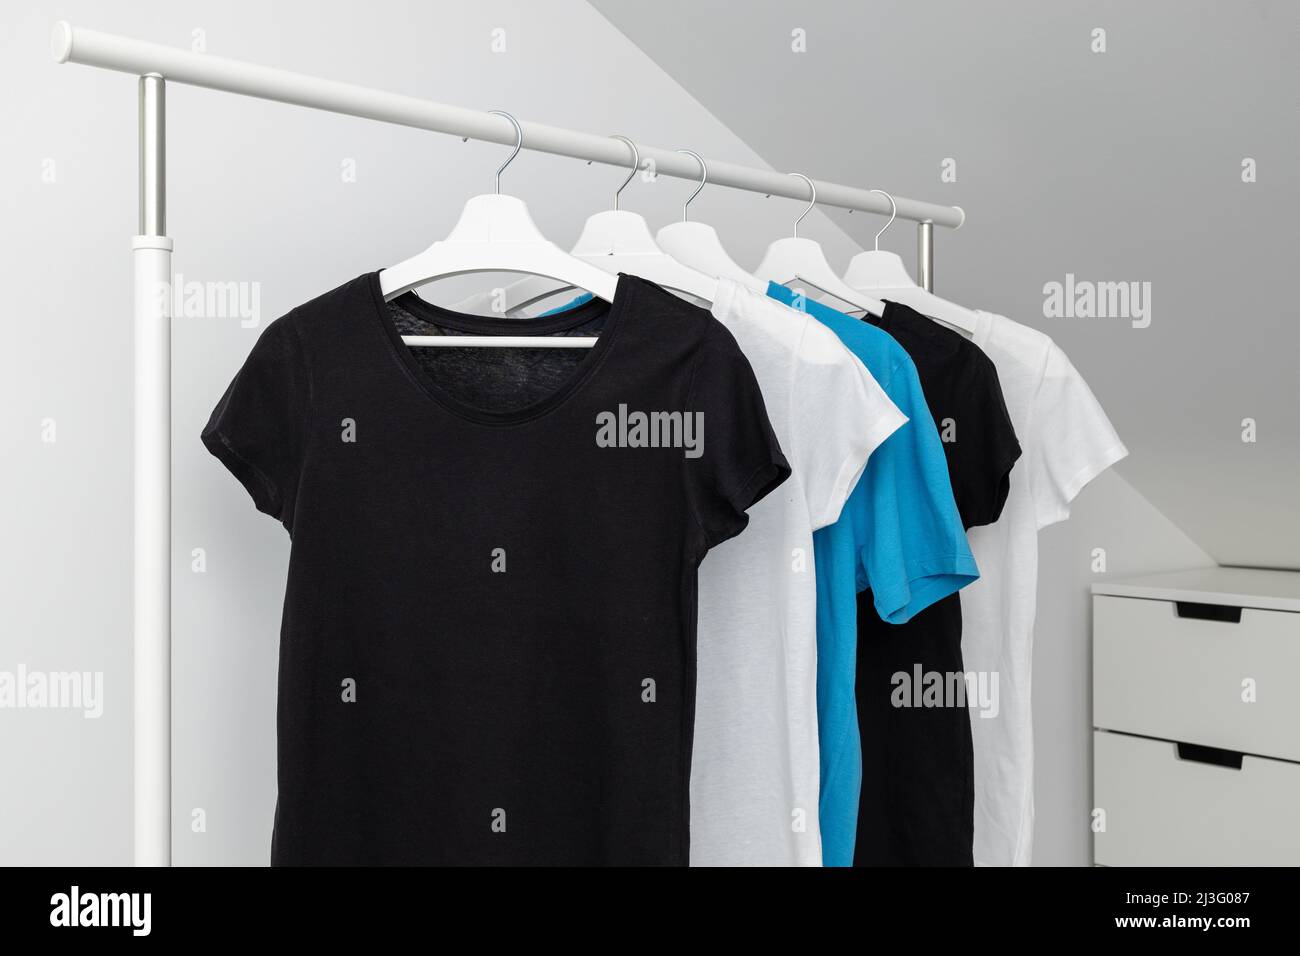 Group of Assorted t-shirts hanging on white hangers. Clothing rack. Template, mock up. Stock Photo